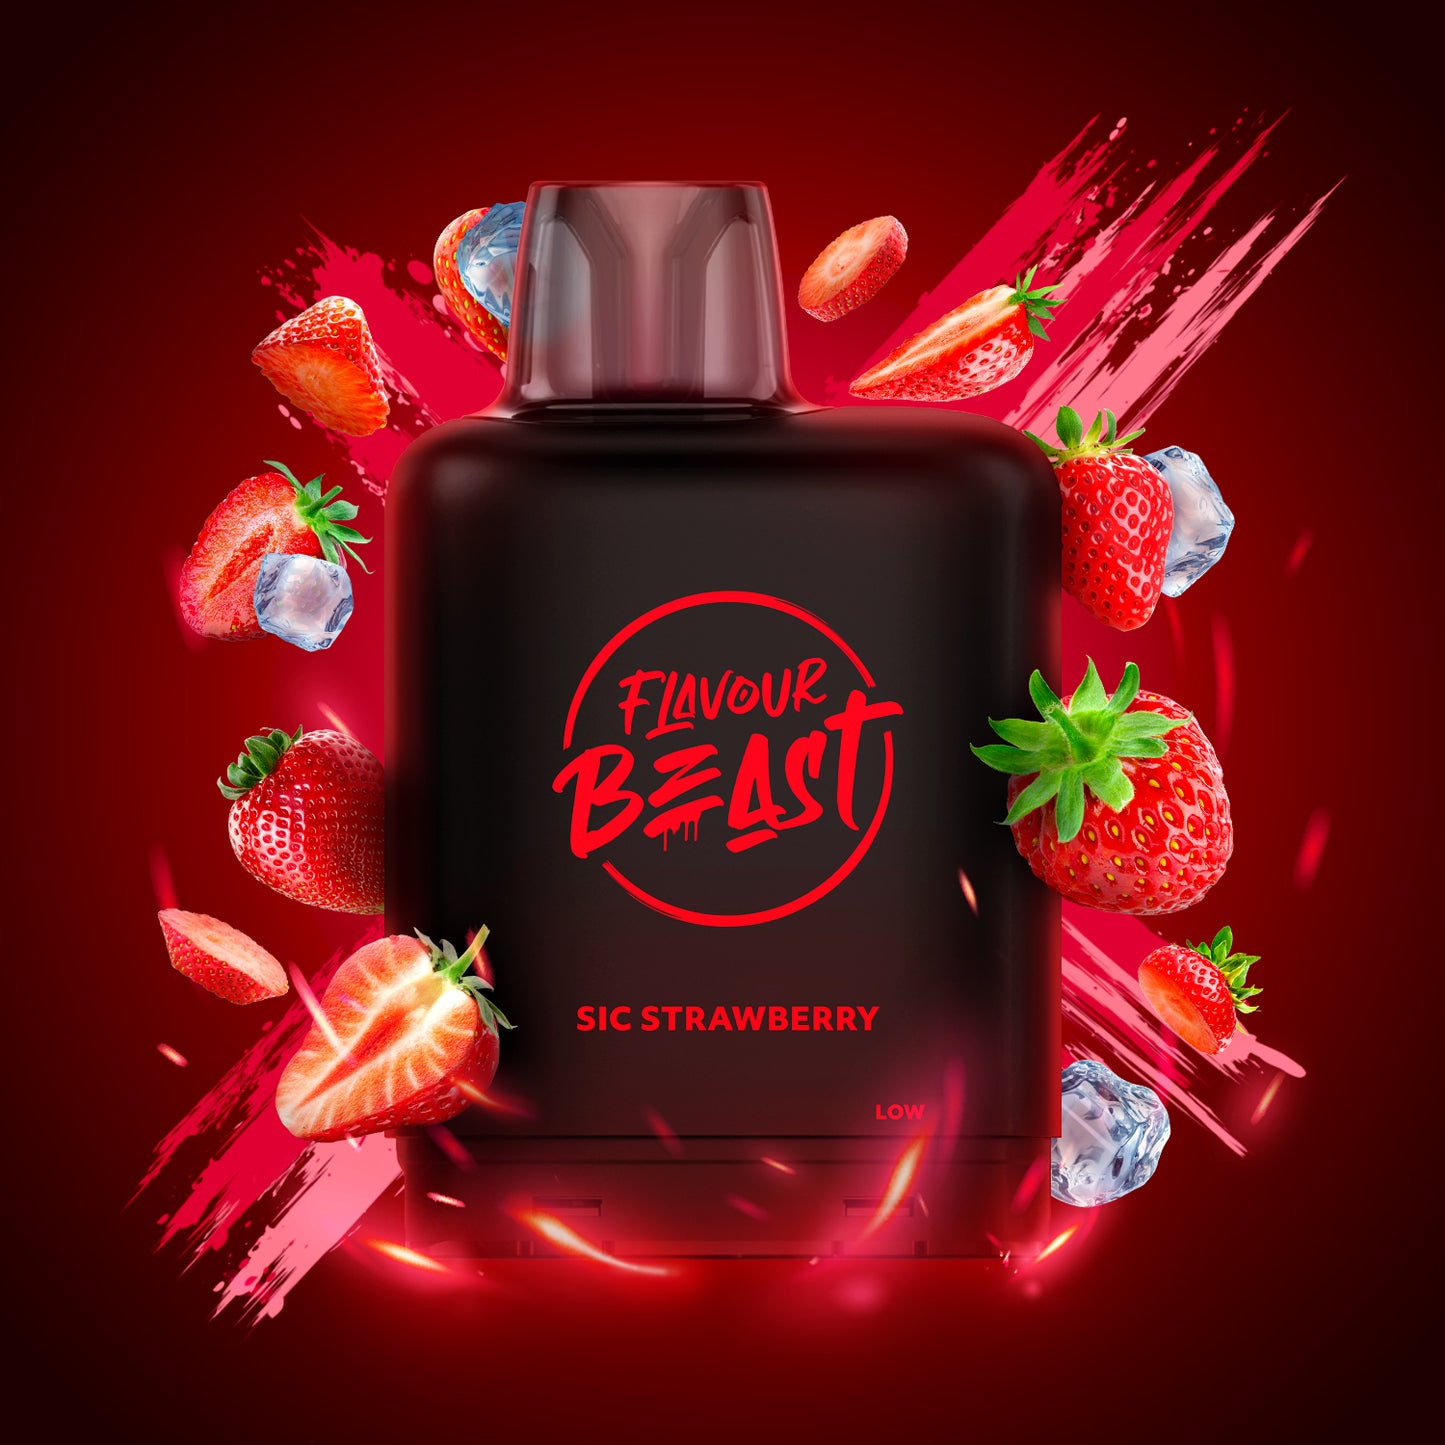 Level X Boost Pod - Flavour Beast - Sic Strawberry Iced